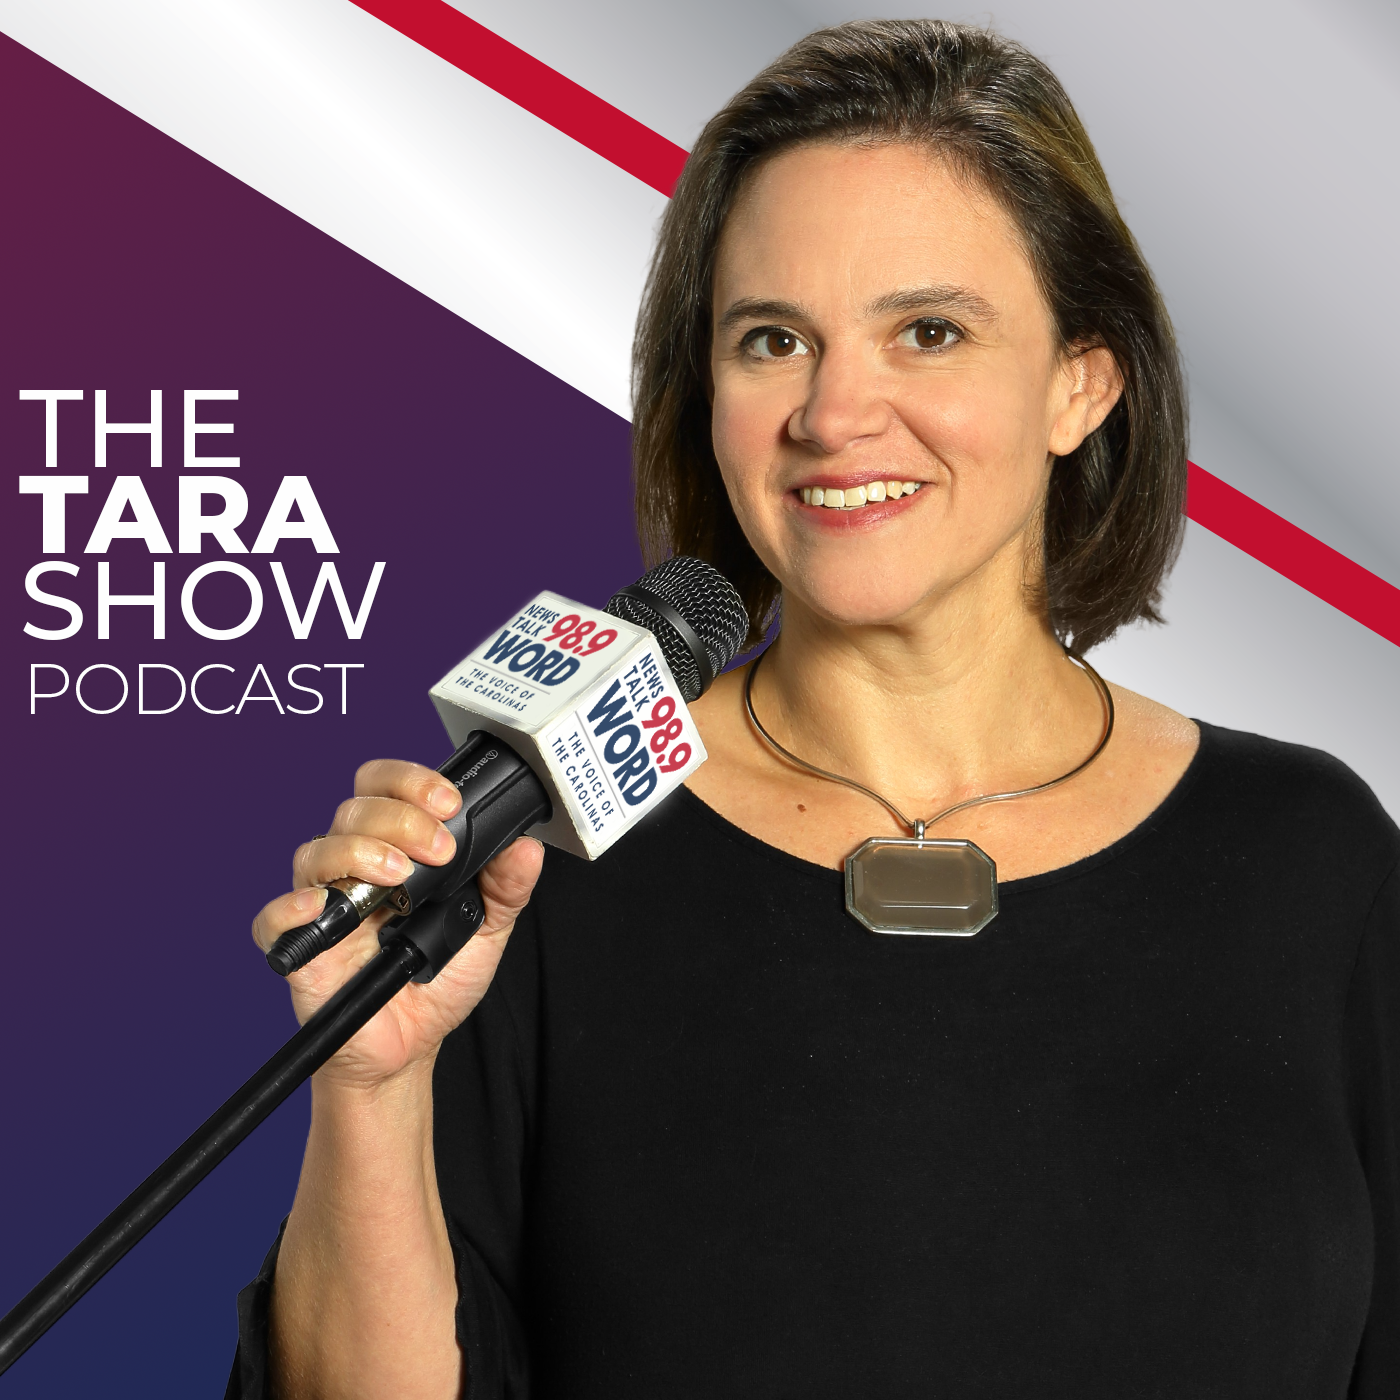 Hour 1: The Tara Show - “Israel Makes History” “Obama and Biden’s WWIII” “Closer to WWIII than Ever Before” “WWIII on the Horizon”